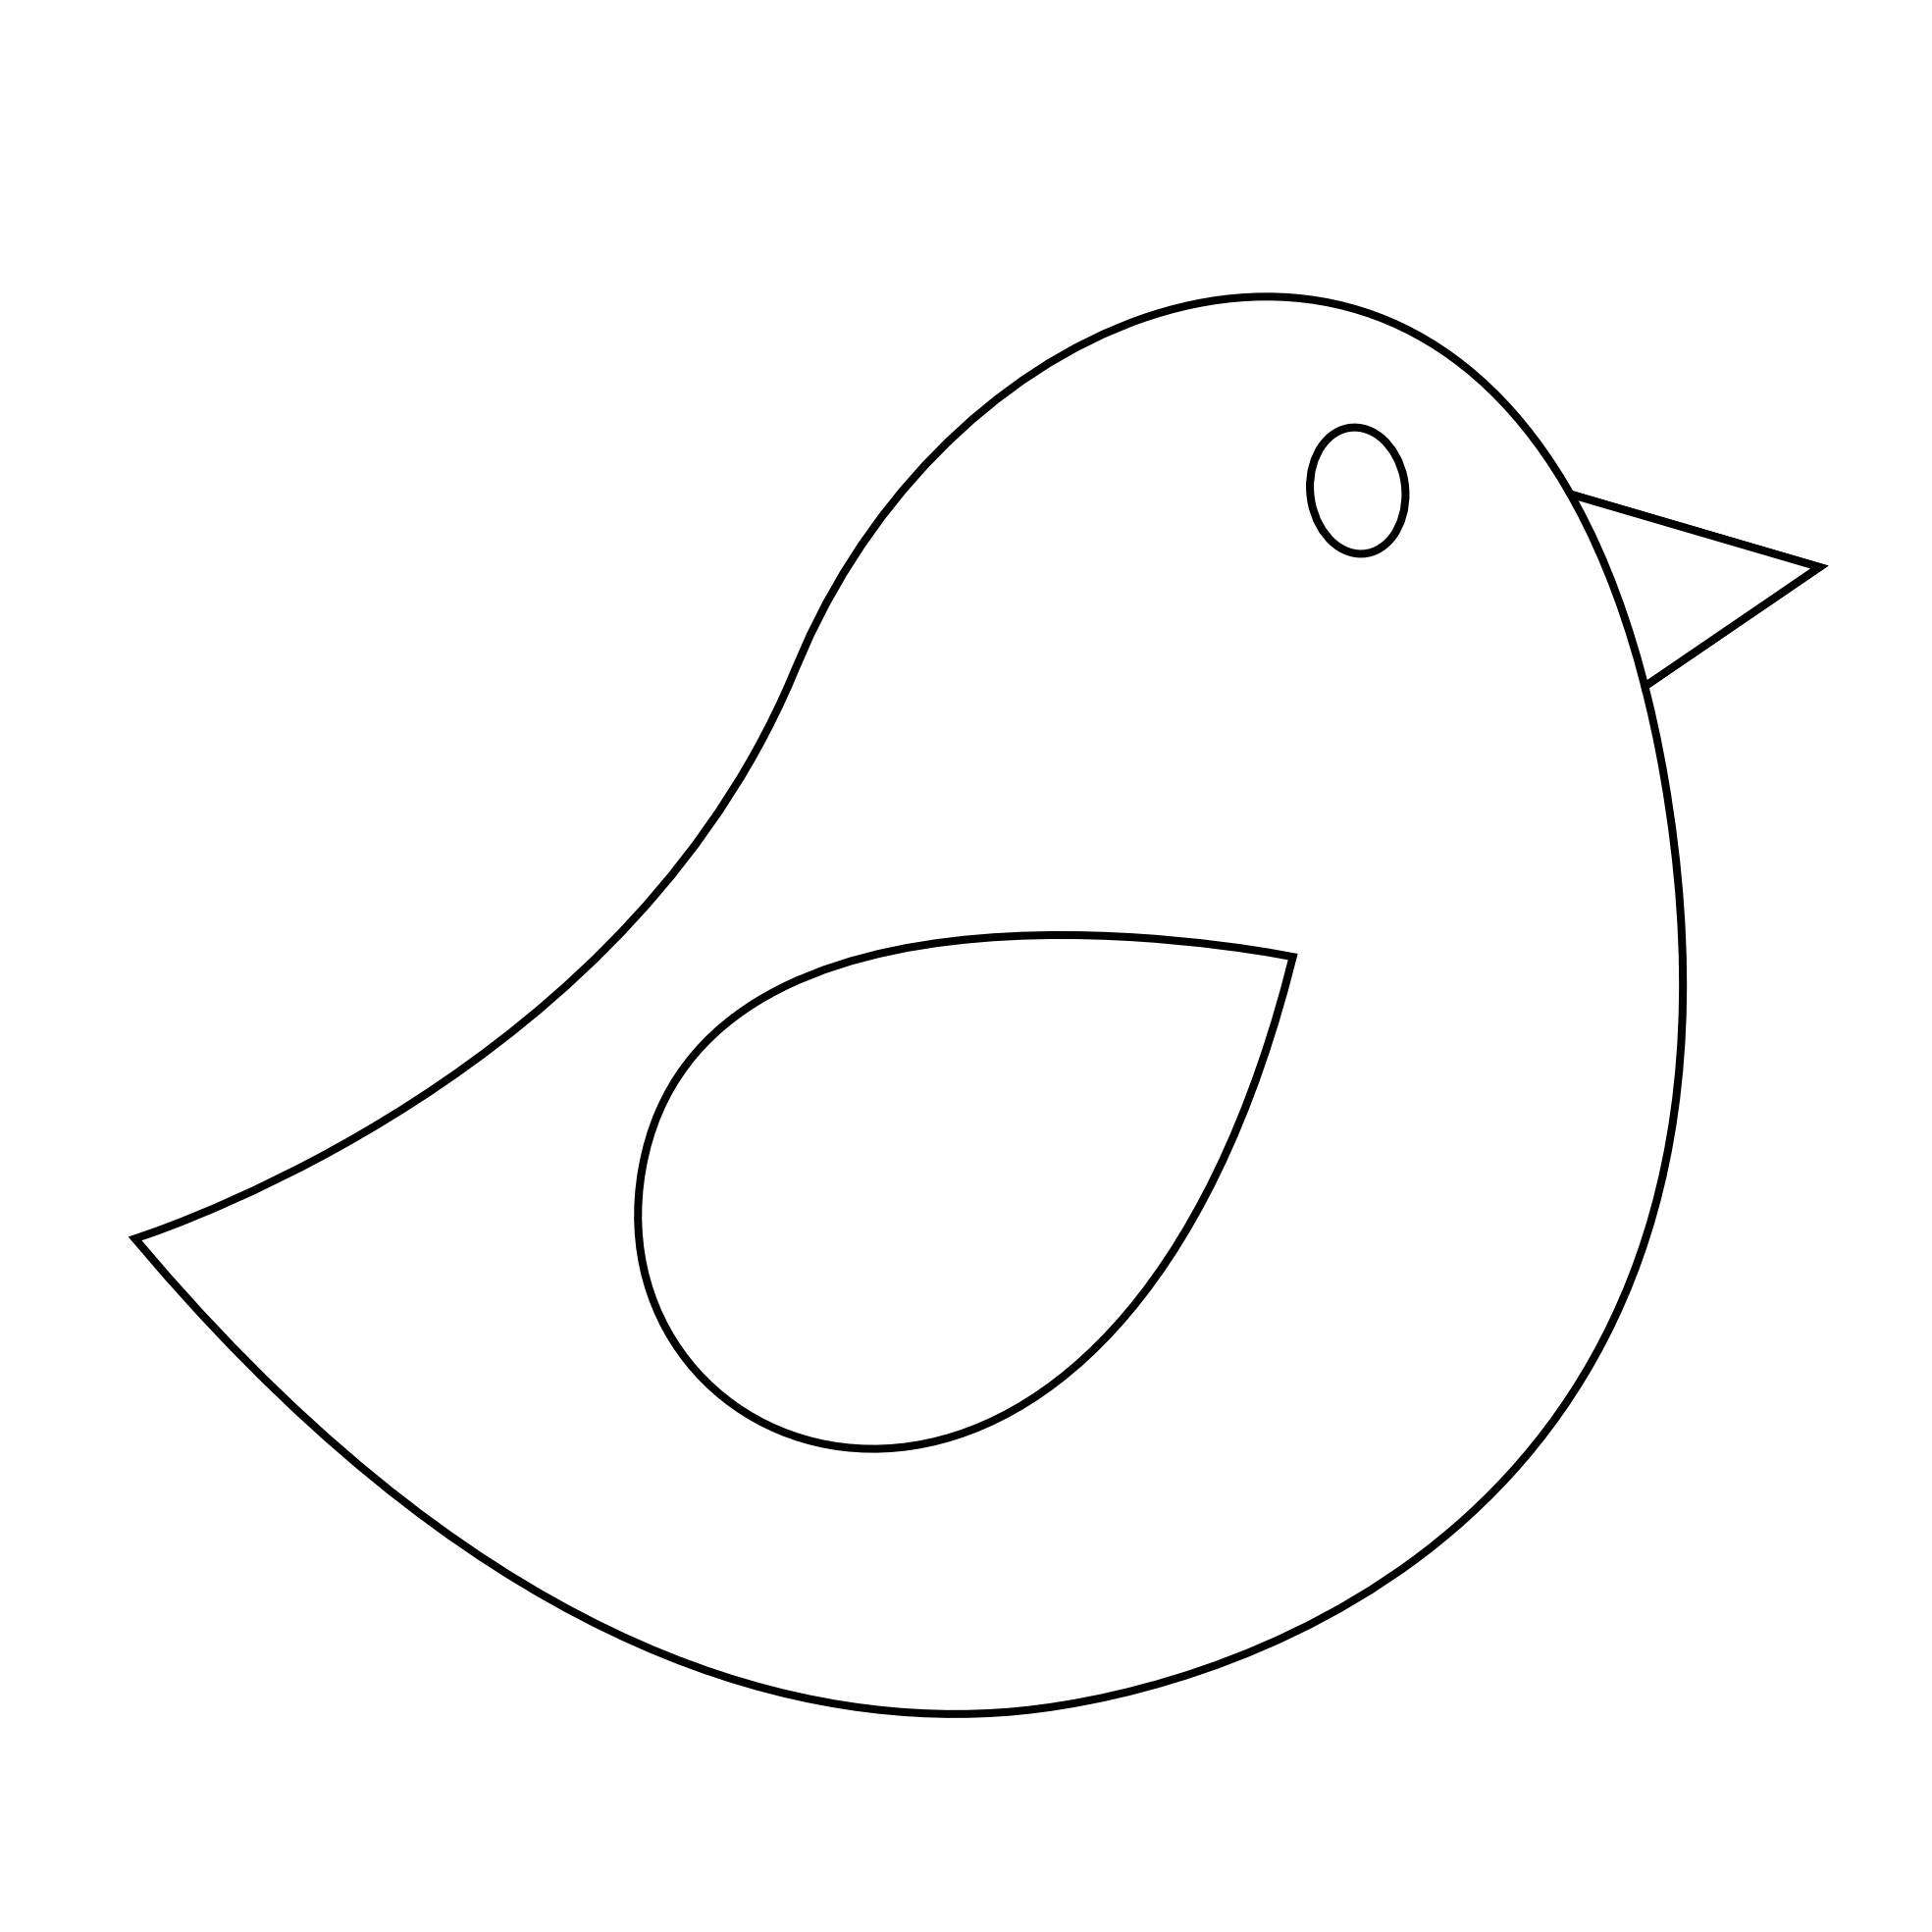 Colorful Animal Bird Twitter Black White Line Art Scalable Vector